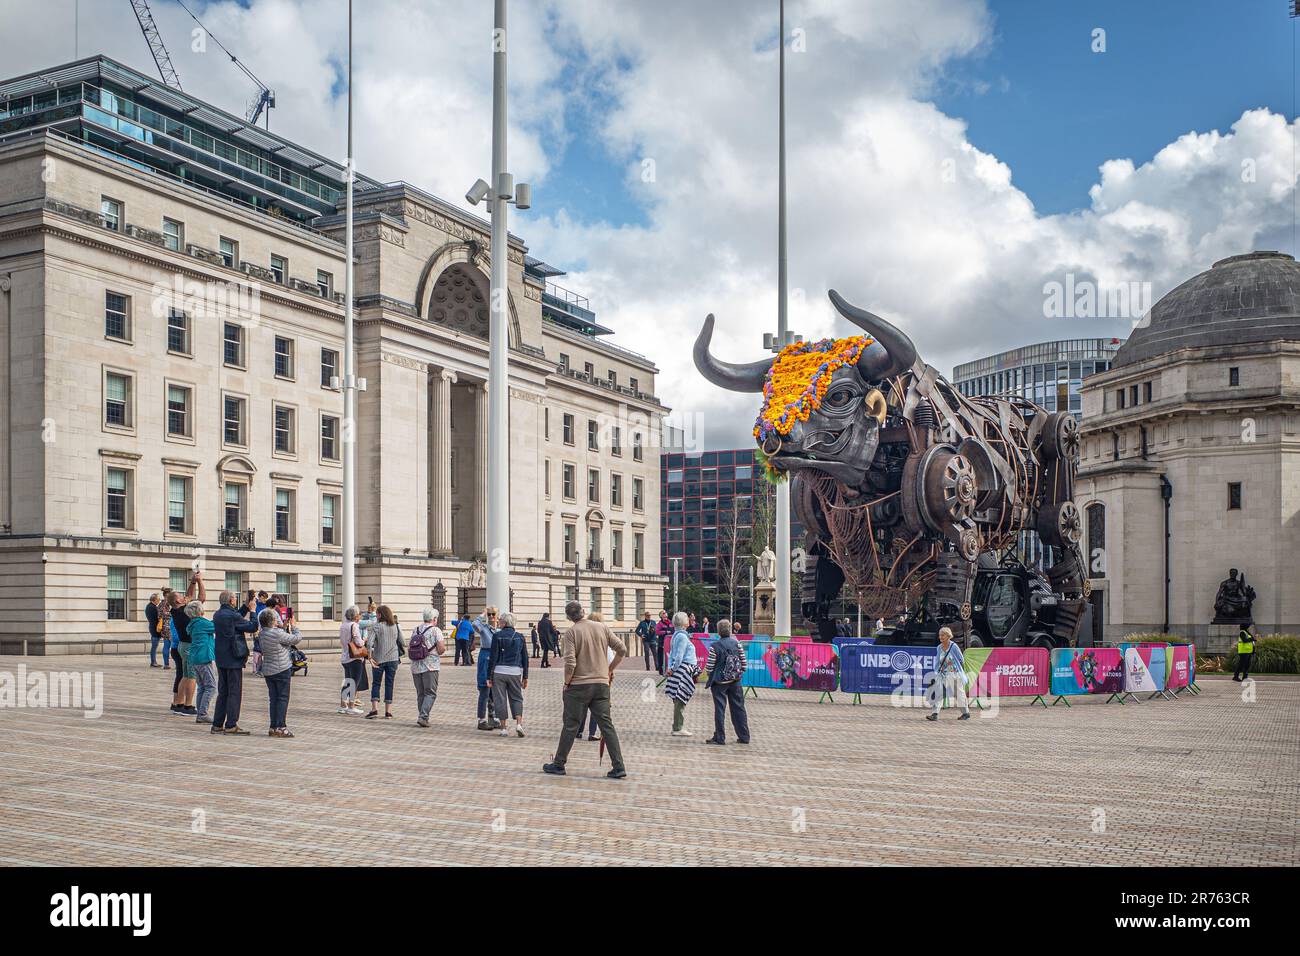 Tourists and sightseers taking photographs of the iconic giant metal bull that first appeared during the Birmingham Commonwealth games. Polinations. Stock Photo